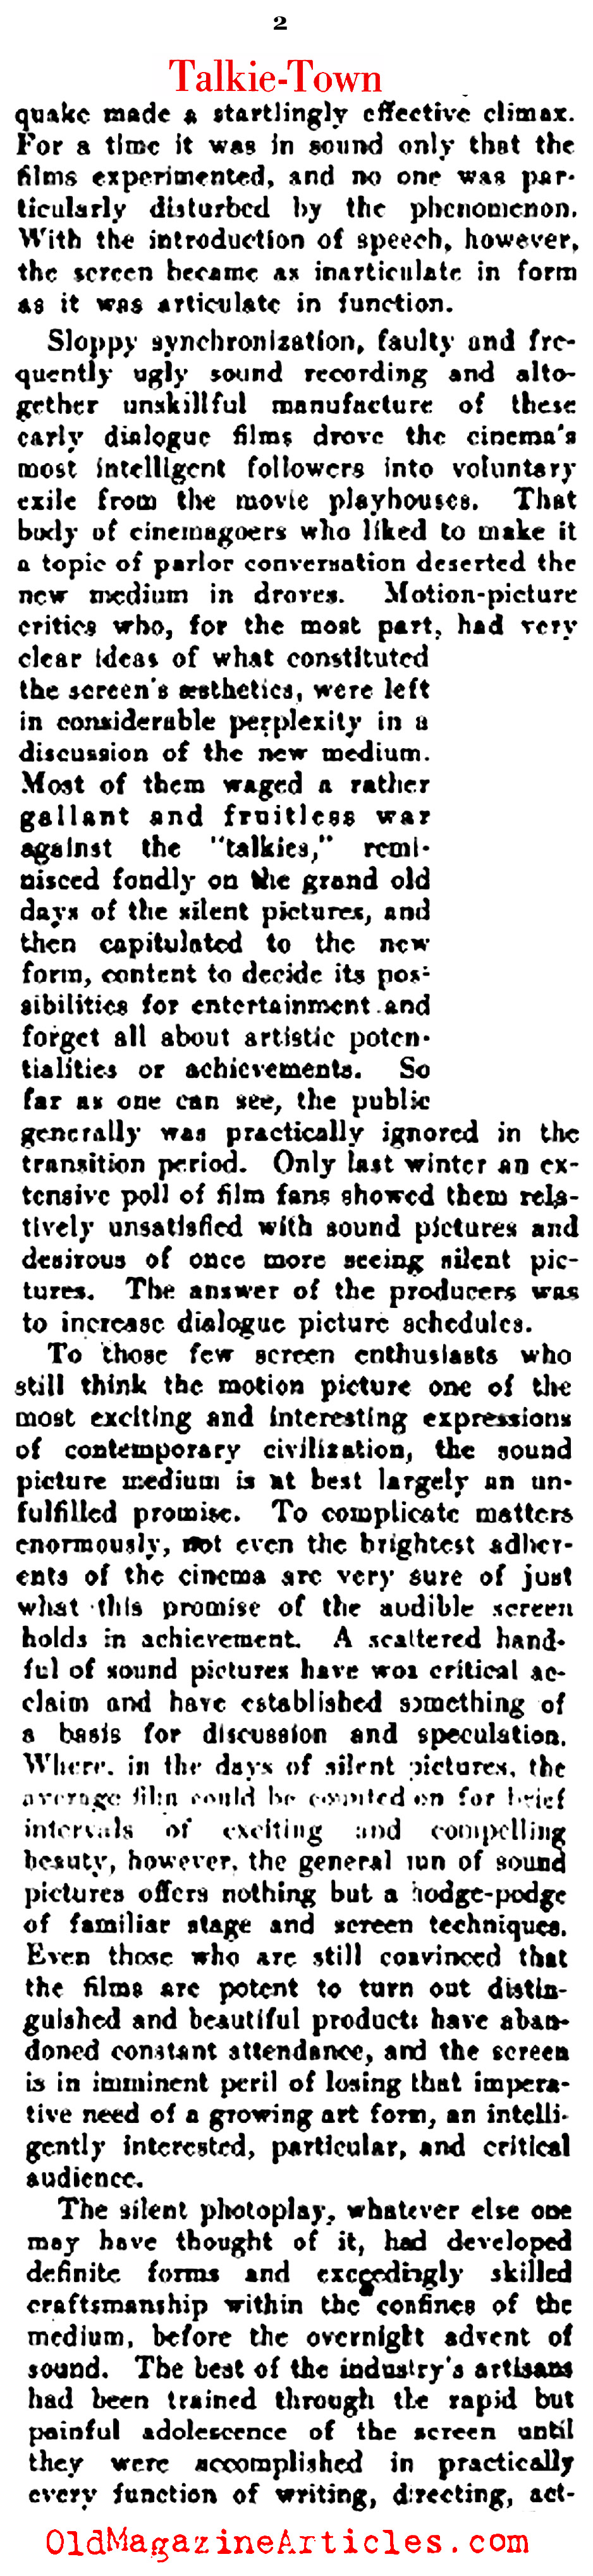 The News from Talkie Town (Theatre Magazine, 1931)